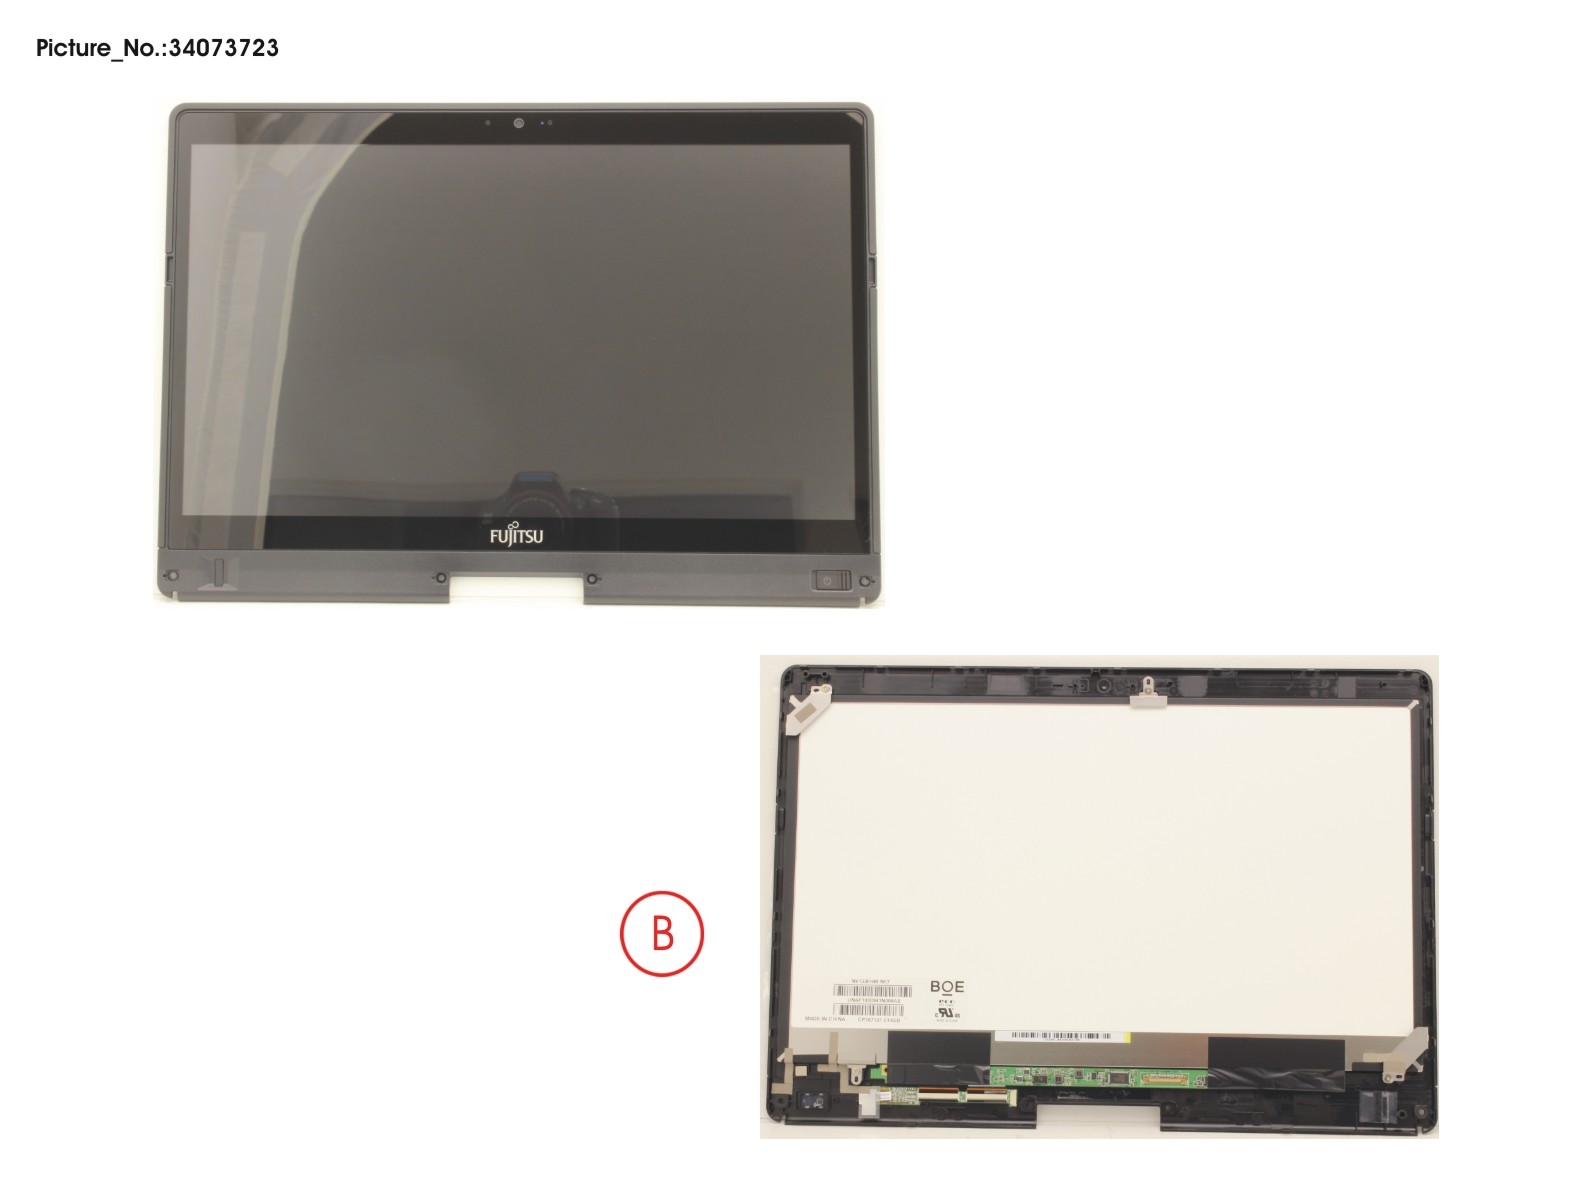 LCD ASSY, G INCL. TP AND DIGITIZER